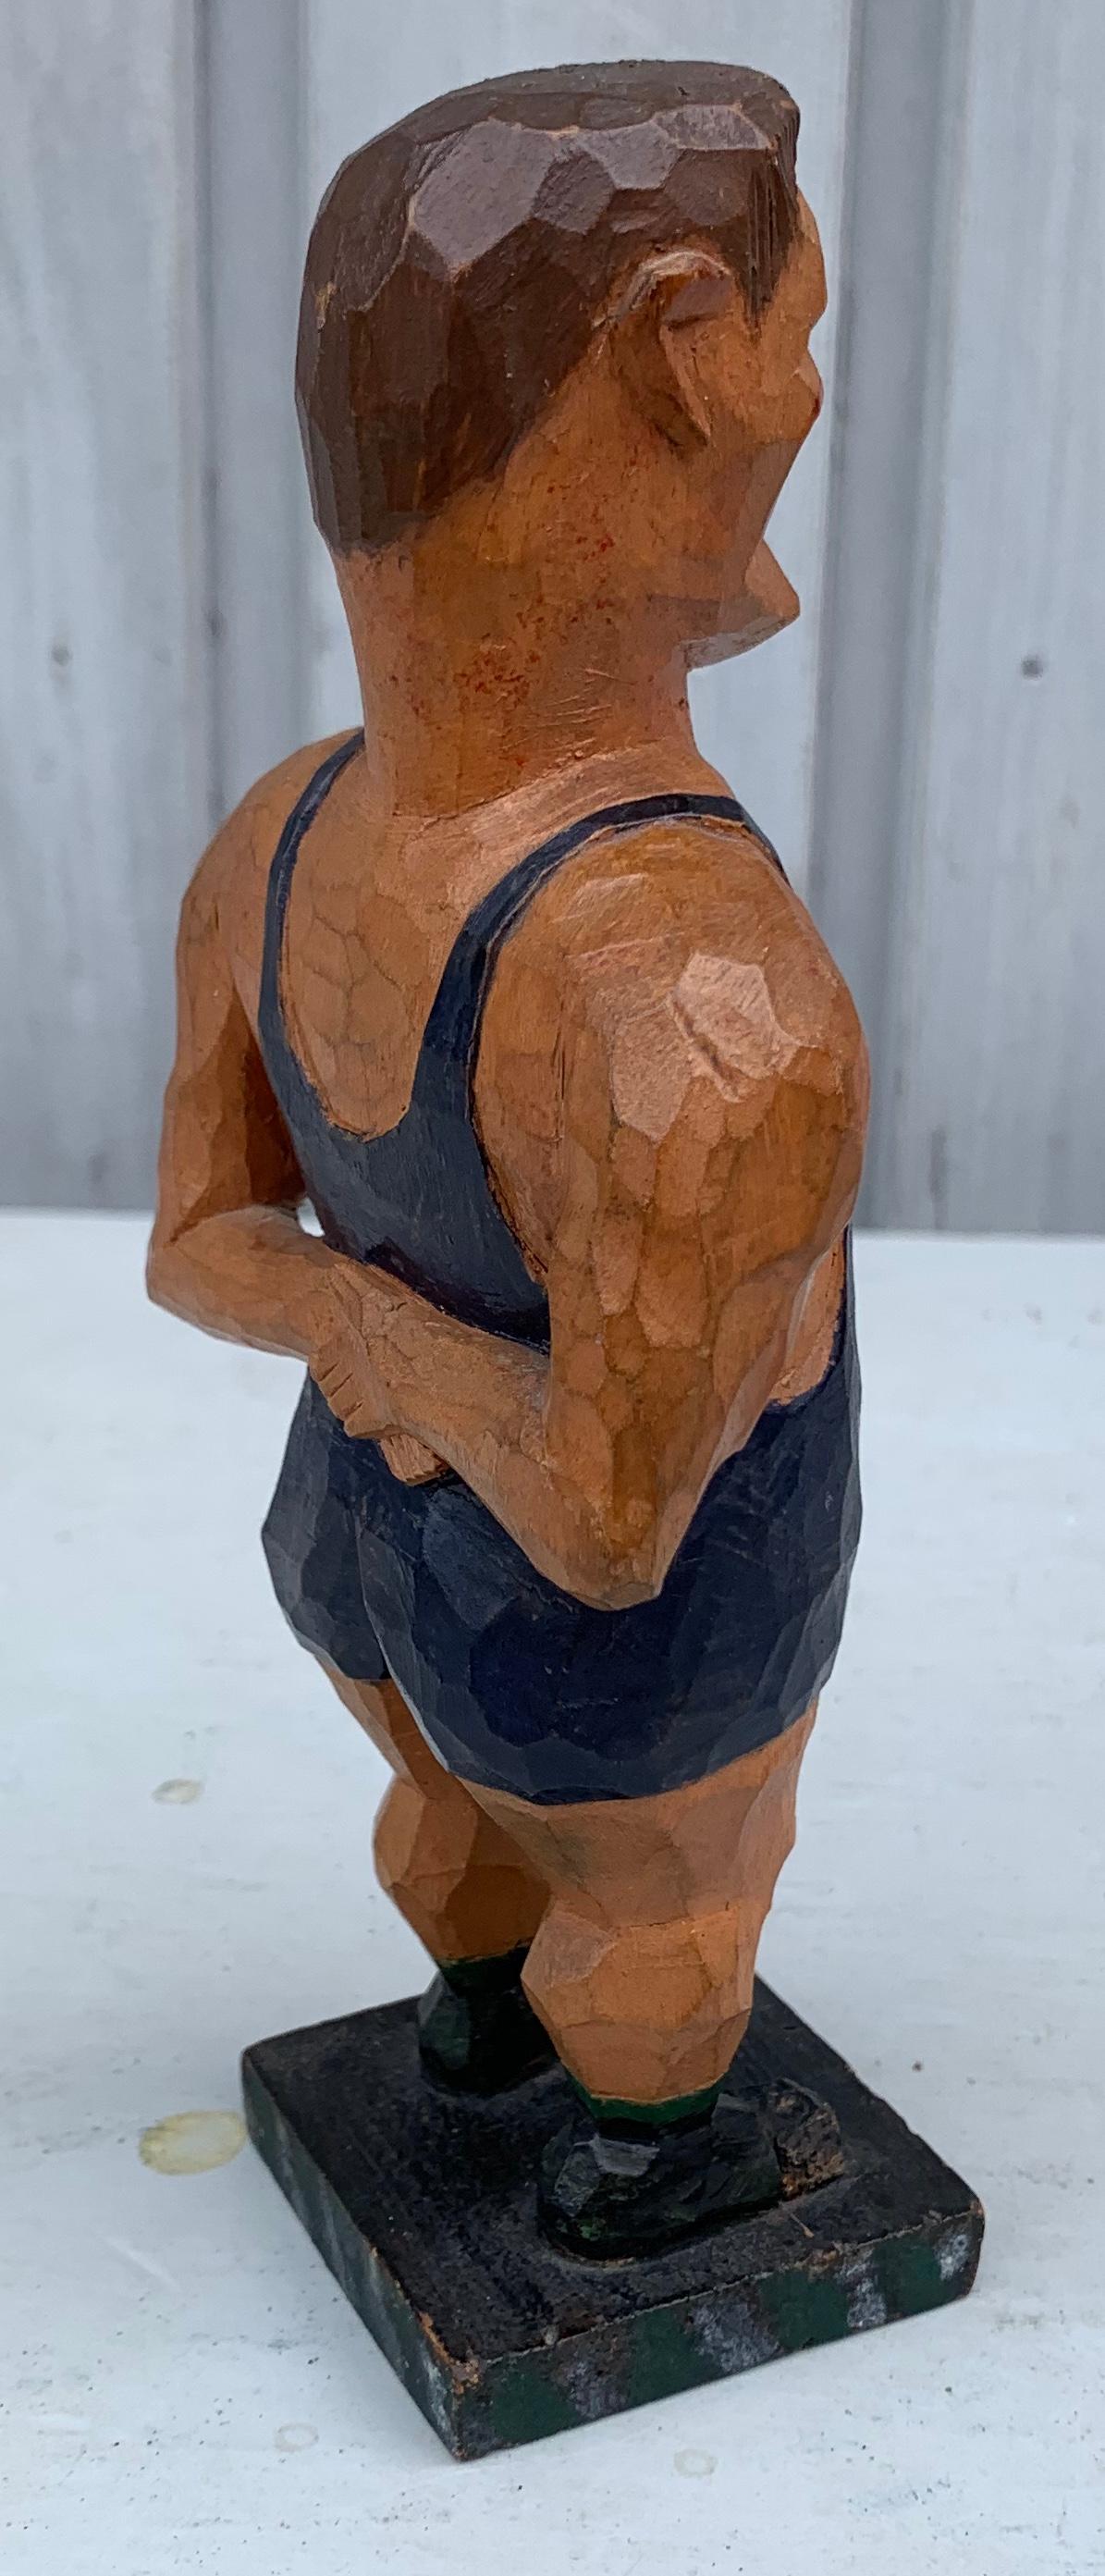 Hand-Carved Swedish Painted Wooden Carved Figure of a Wrestler